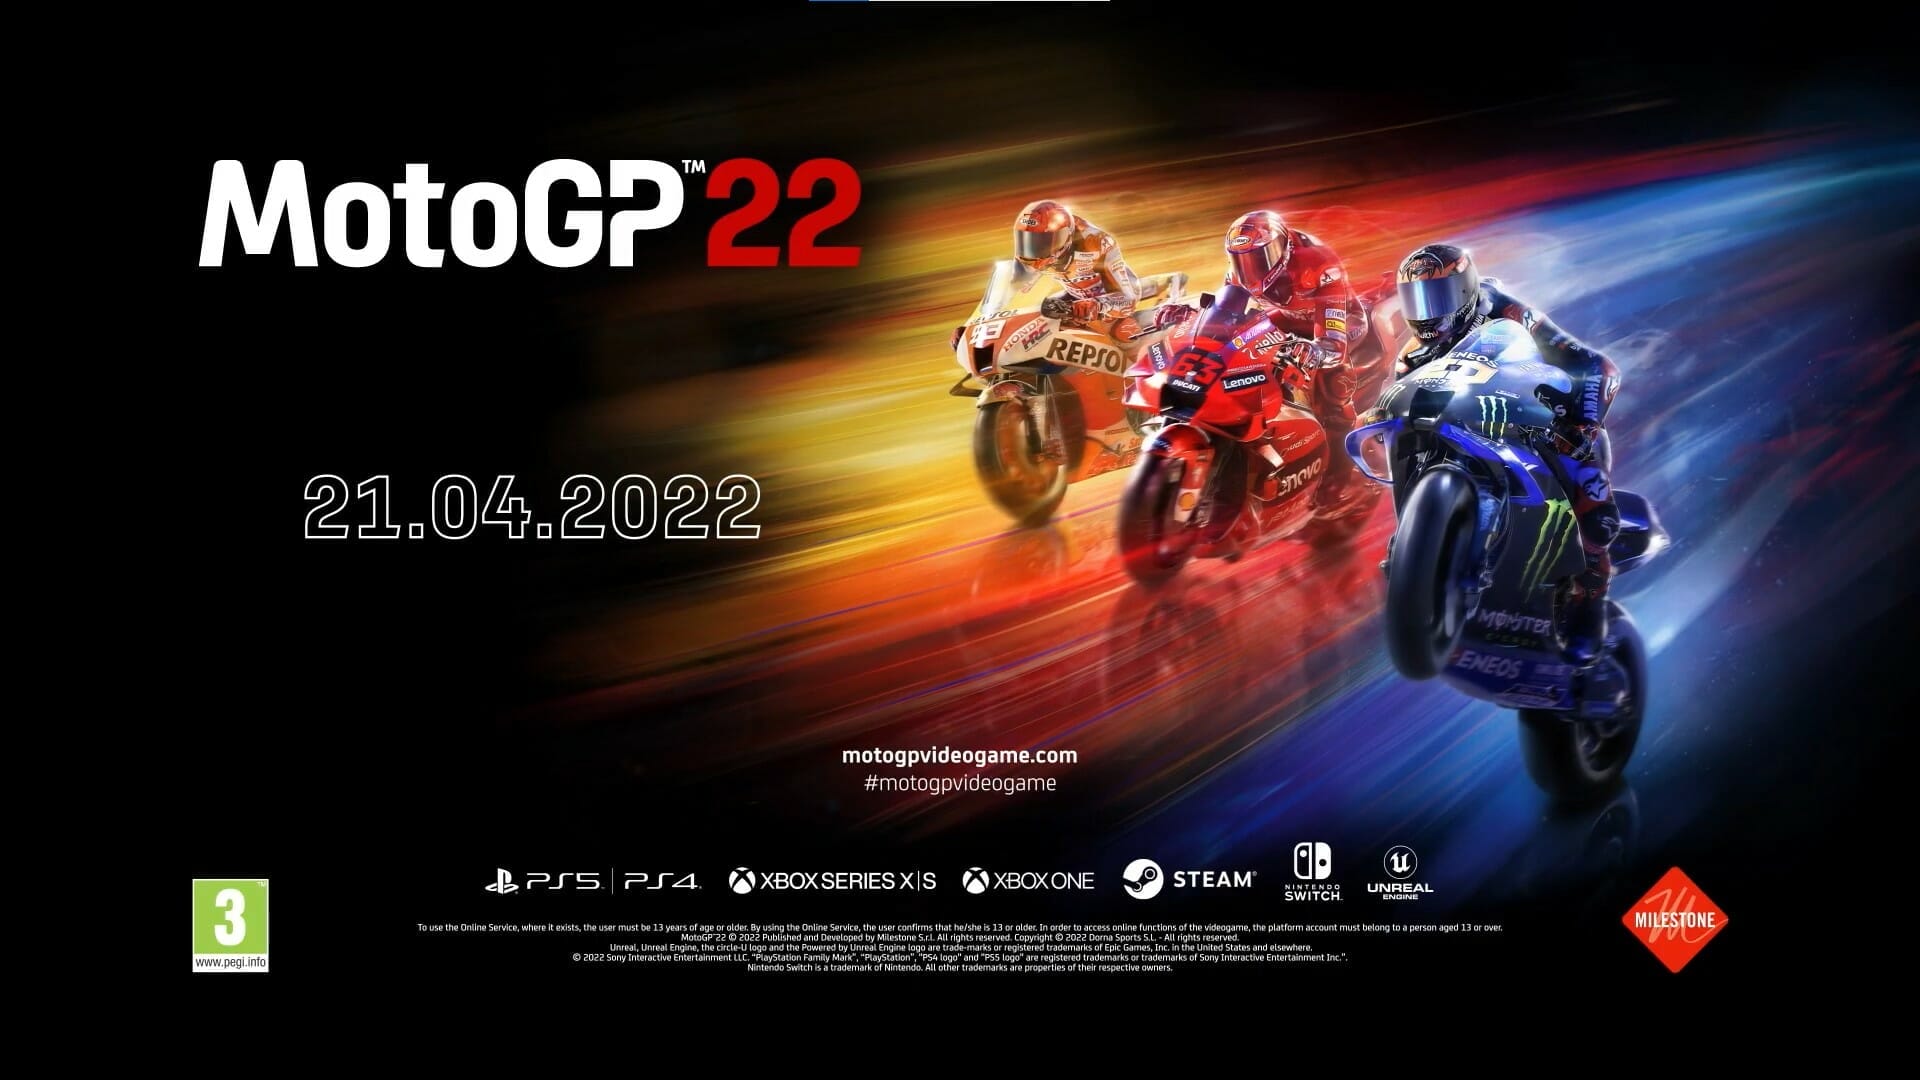 MotoGP22 - Nostalgia meets modernity
- also in the MOTORCYCLES.NEWS APP